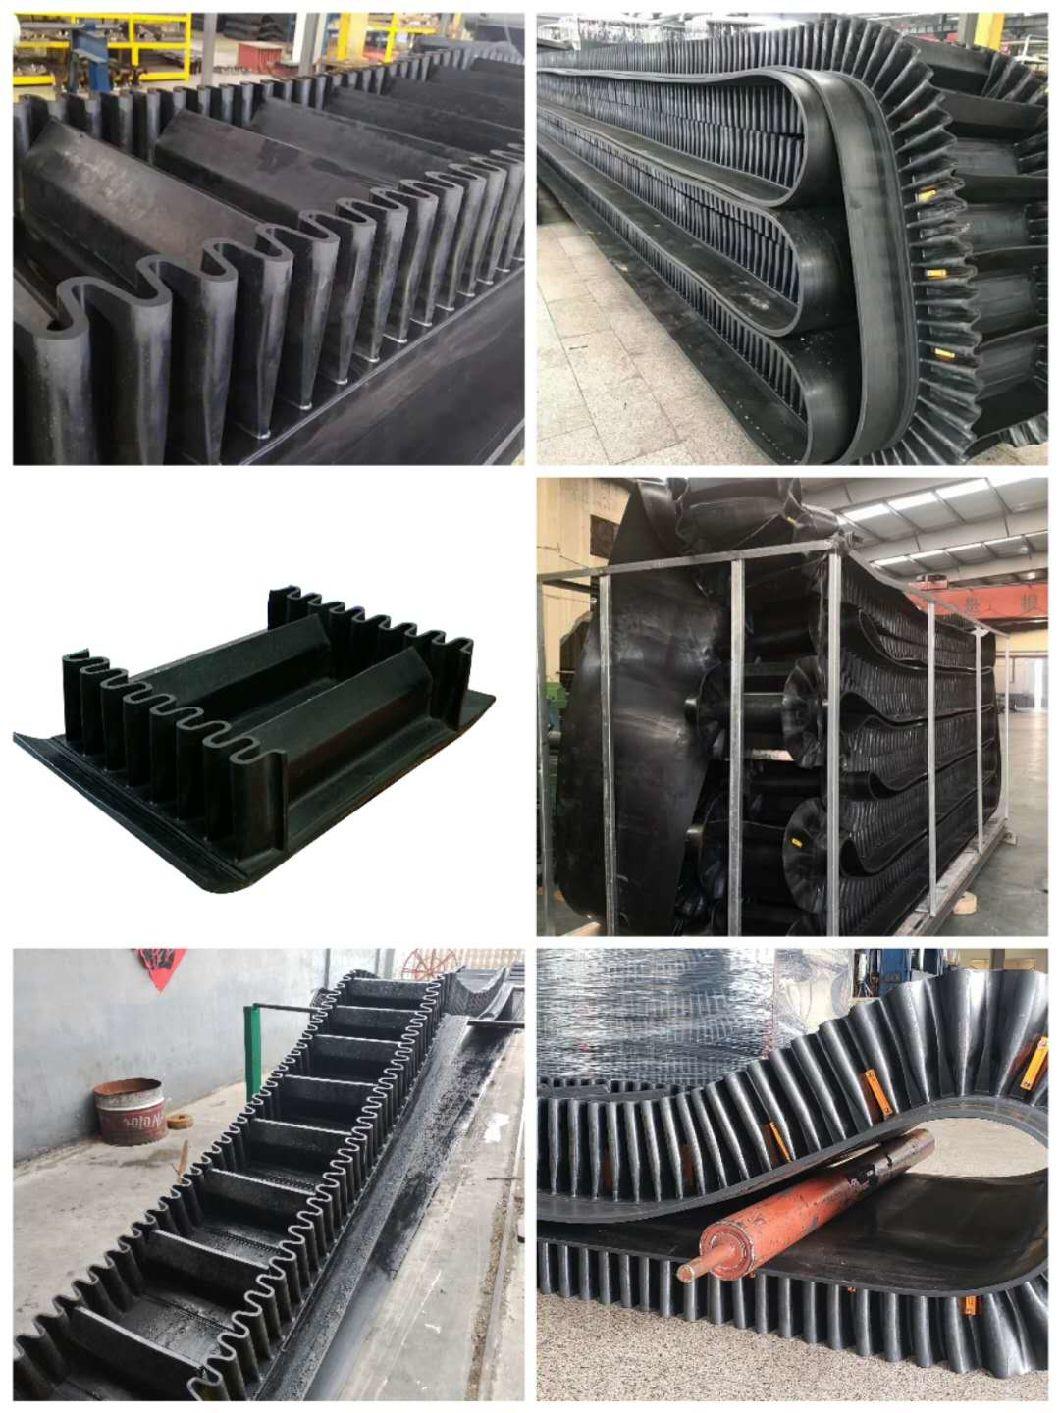 Moulded Edge Rubber Conveyor Belt Ep250 for Coal Mining